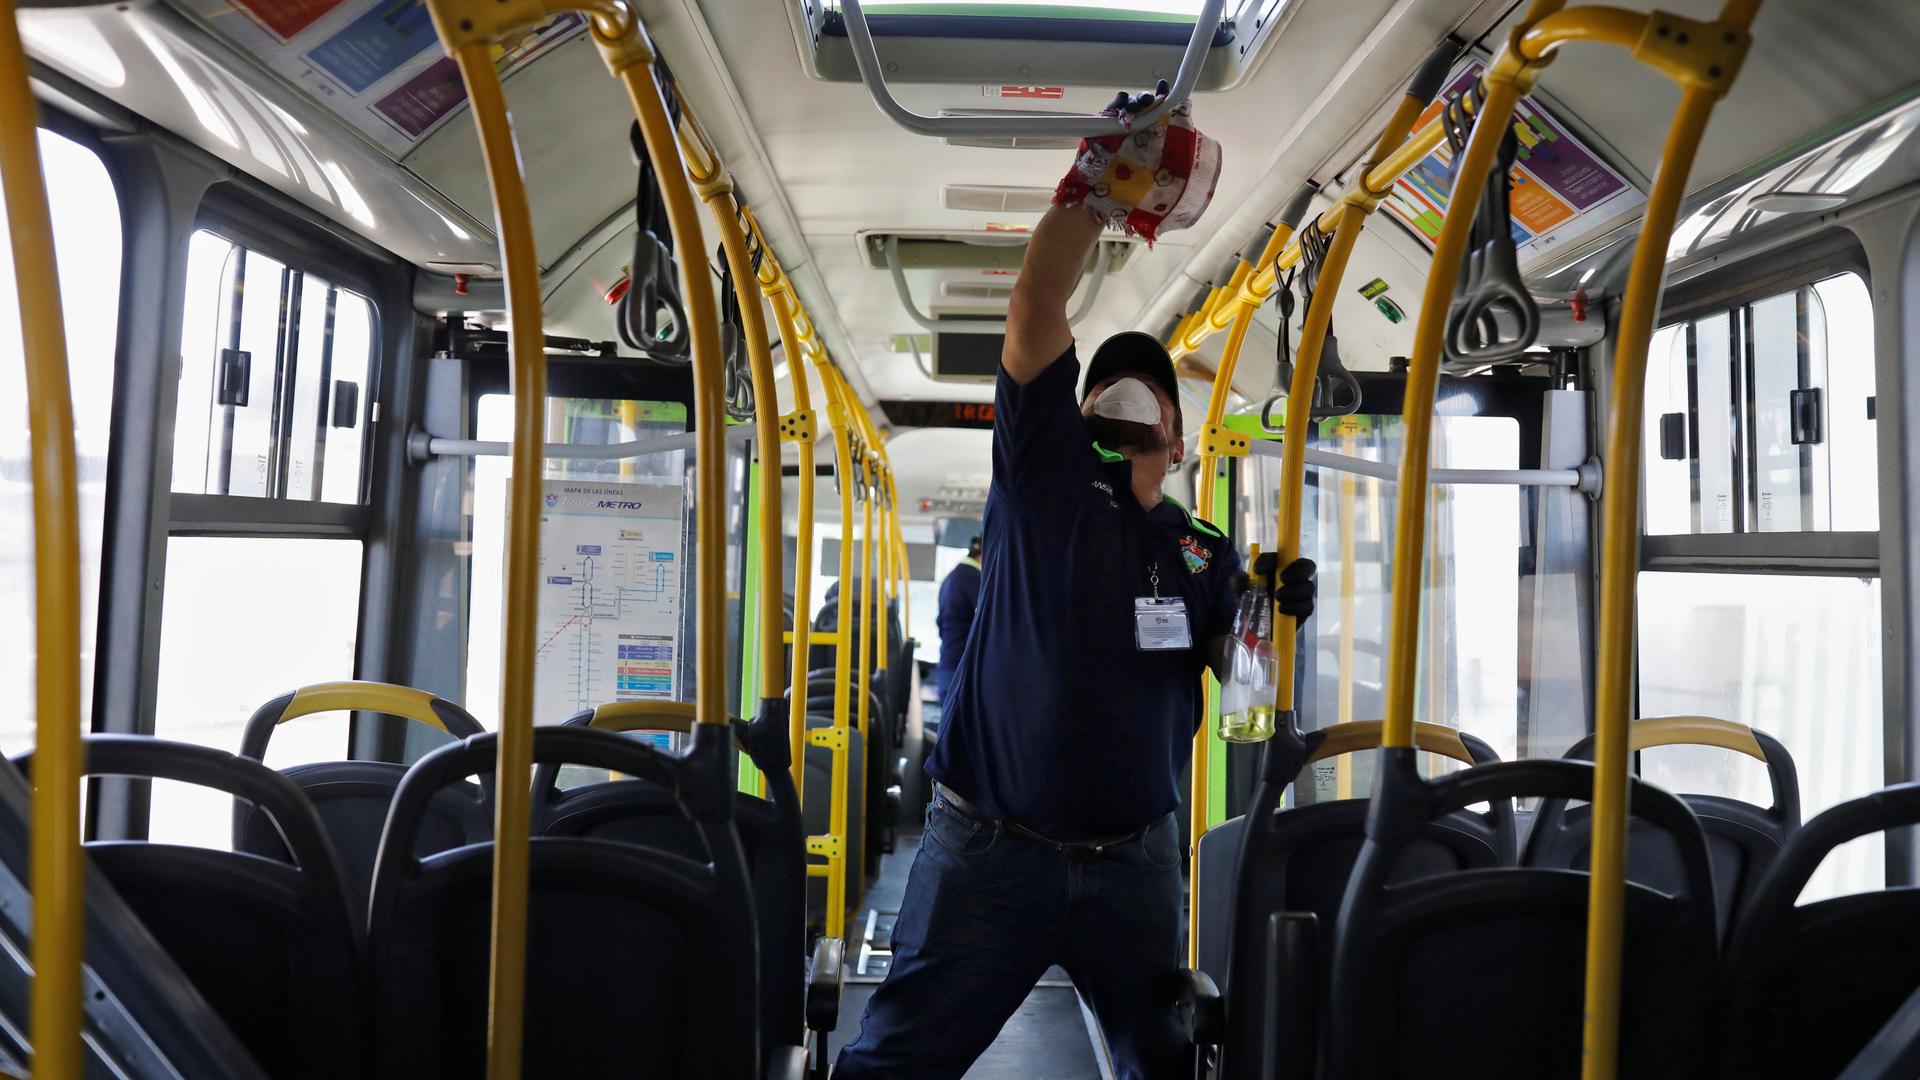 A worker wears a protective face mask works while cleaning the interior of a public bus, amid concerns over the spread of coronavirus disease (COVID-19), in Guatemala City, Guatemala, March 15, 2020. 